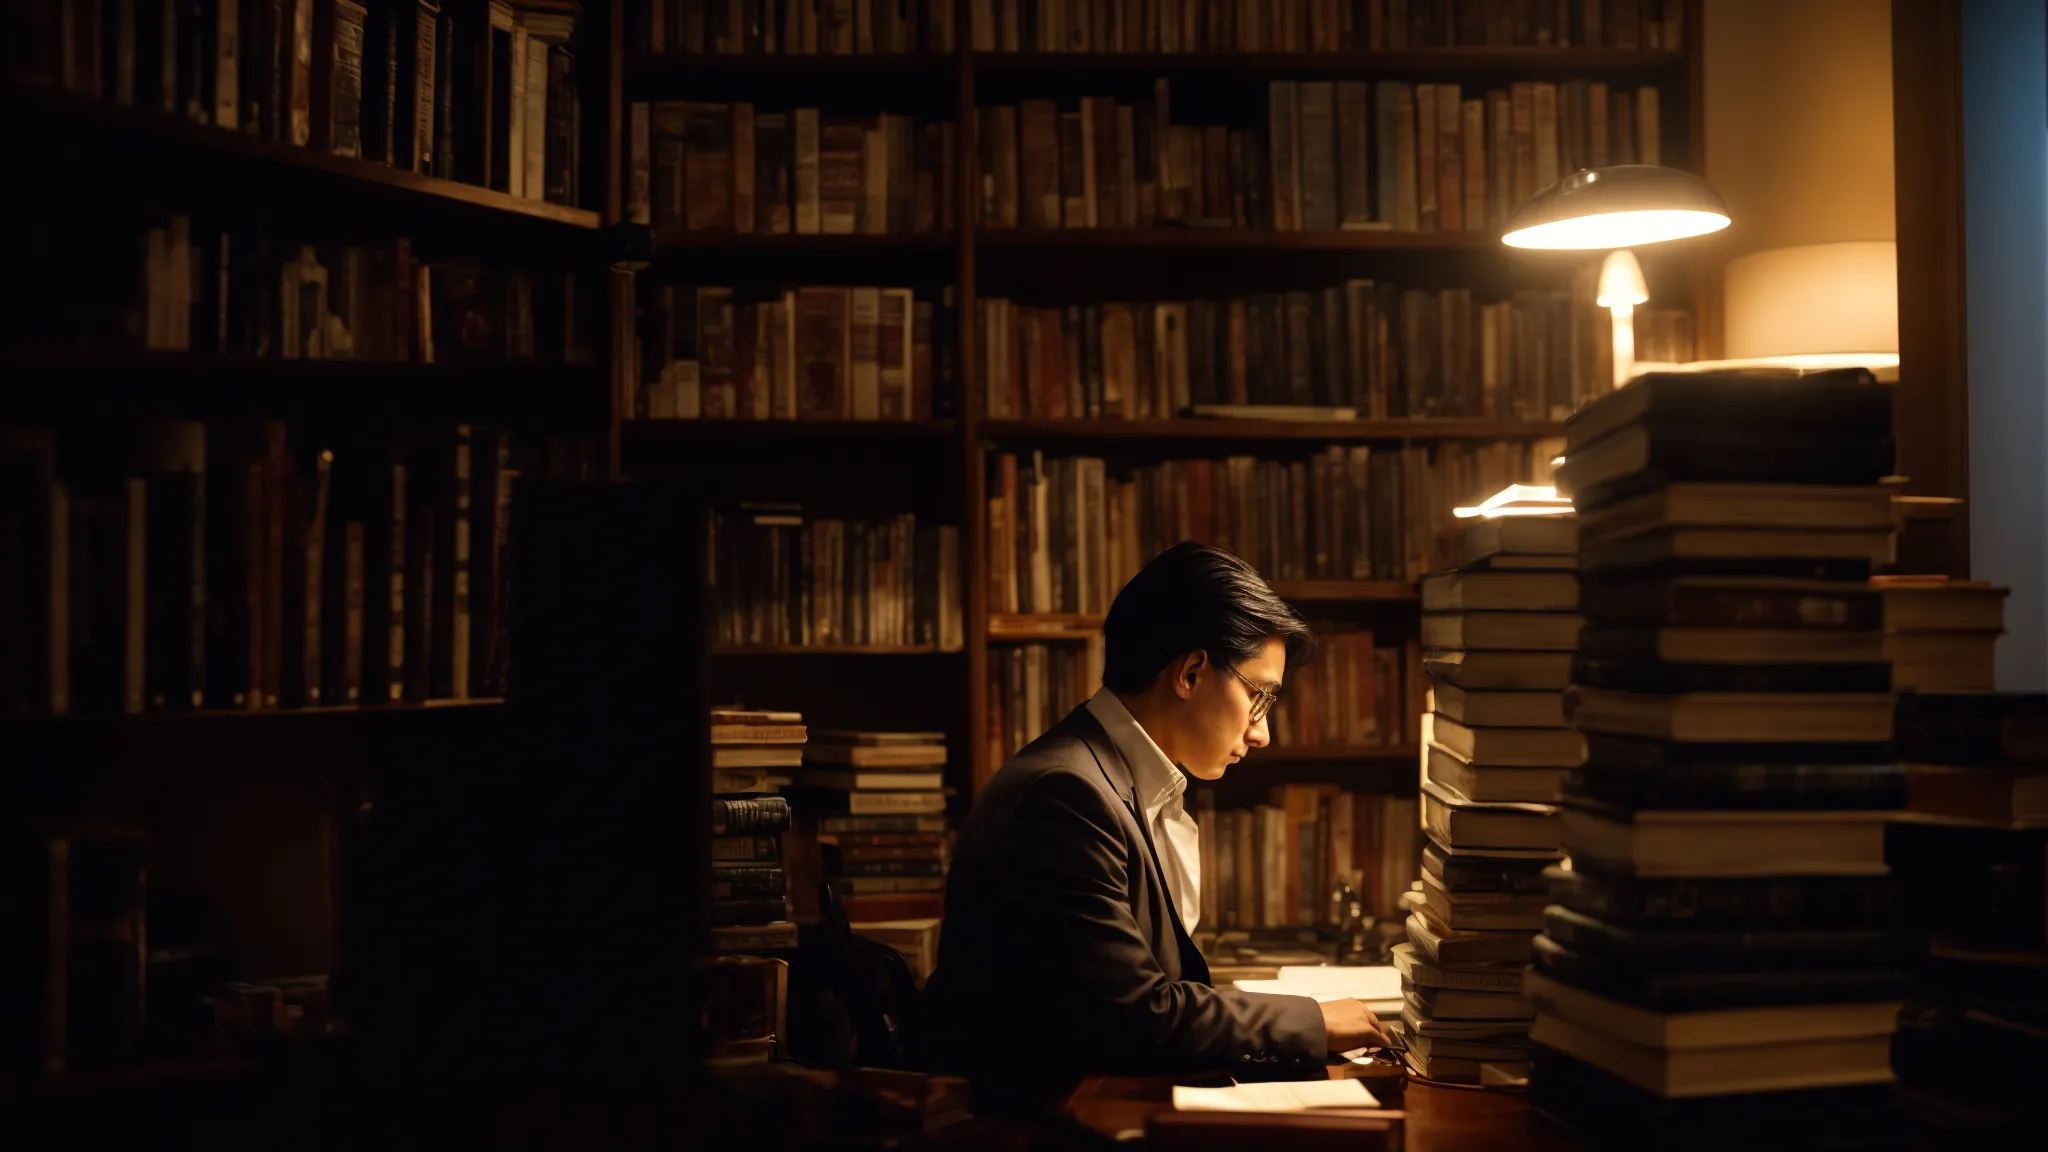 a person surrounded by towering stacks of books, peering intently at a computer screen, in a room illuminated by the soft glow of a desk lamp.